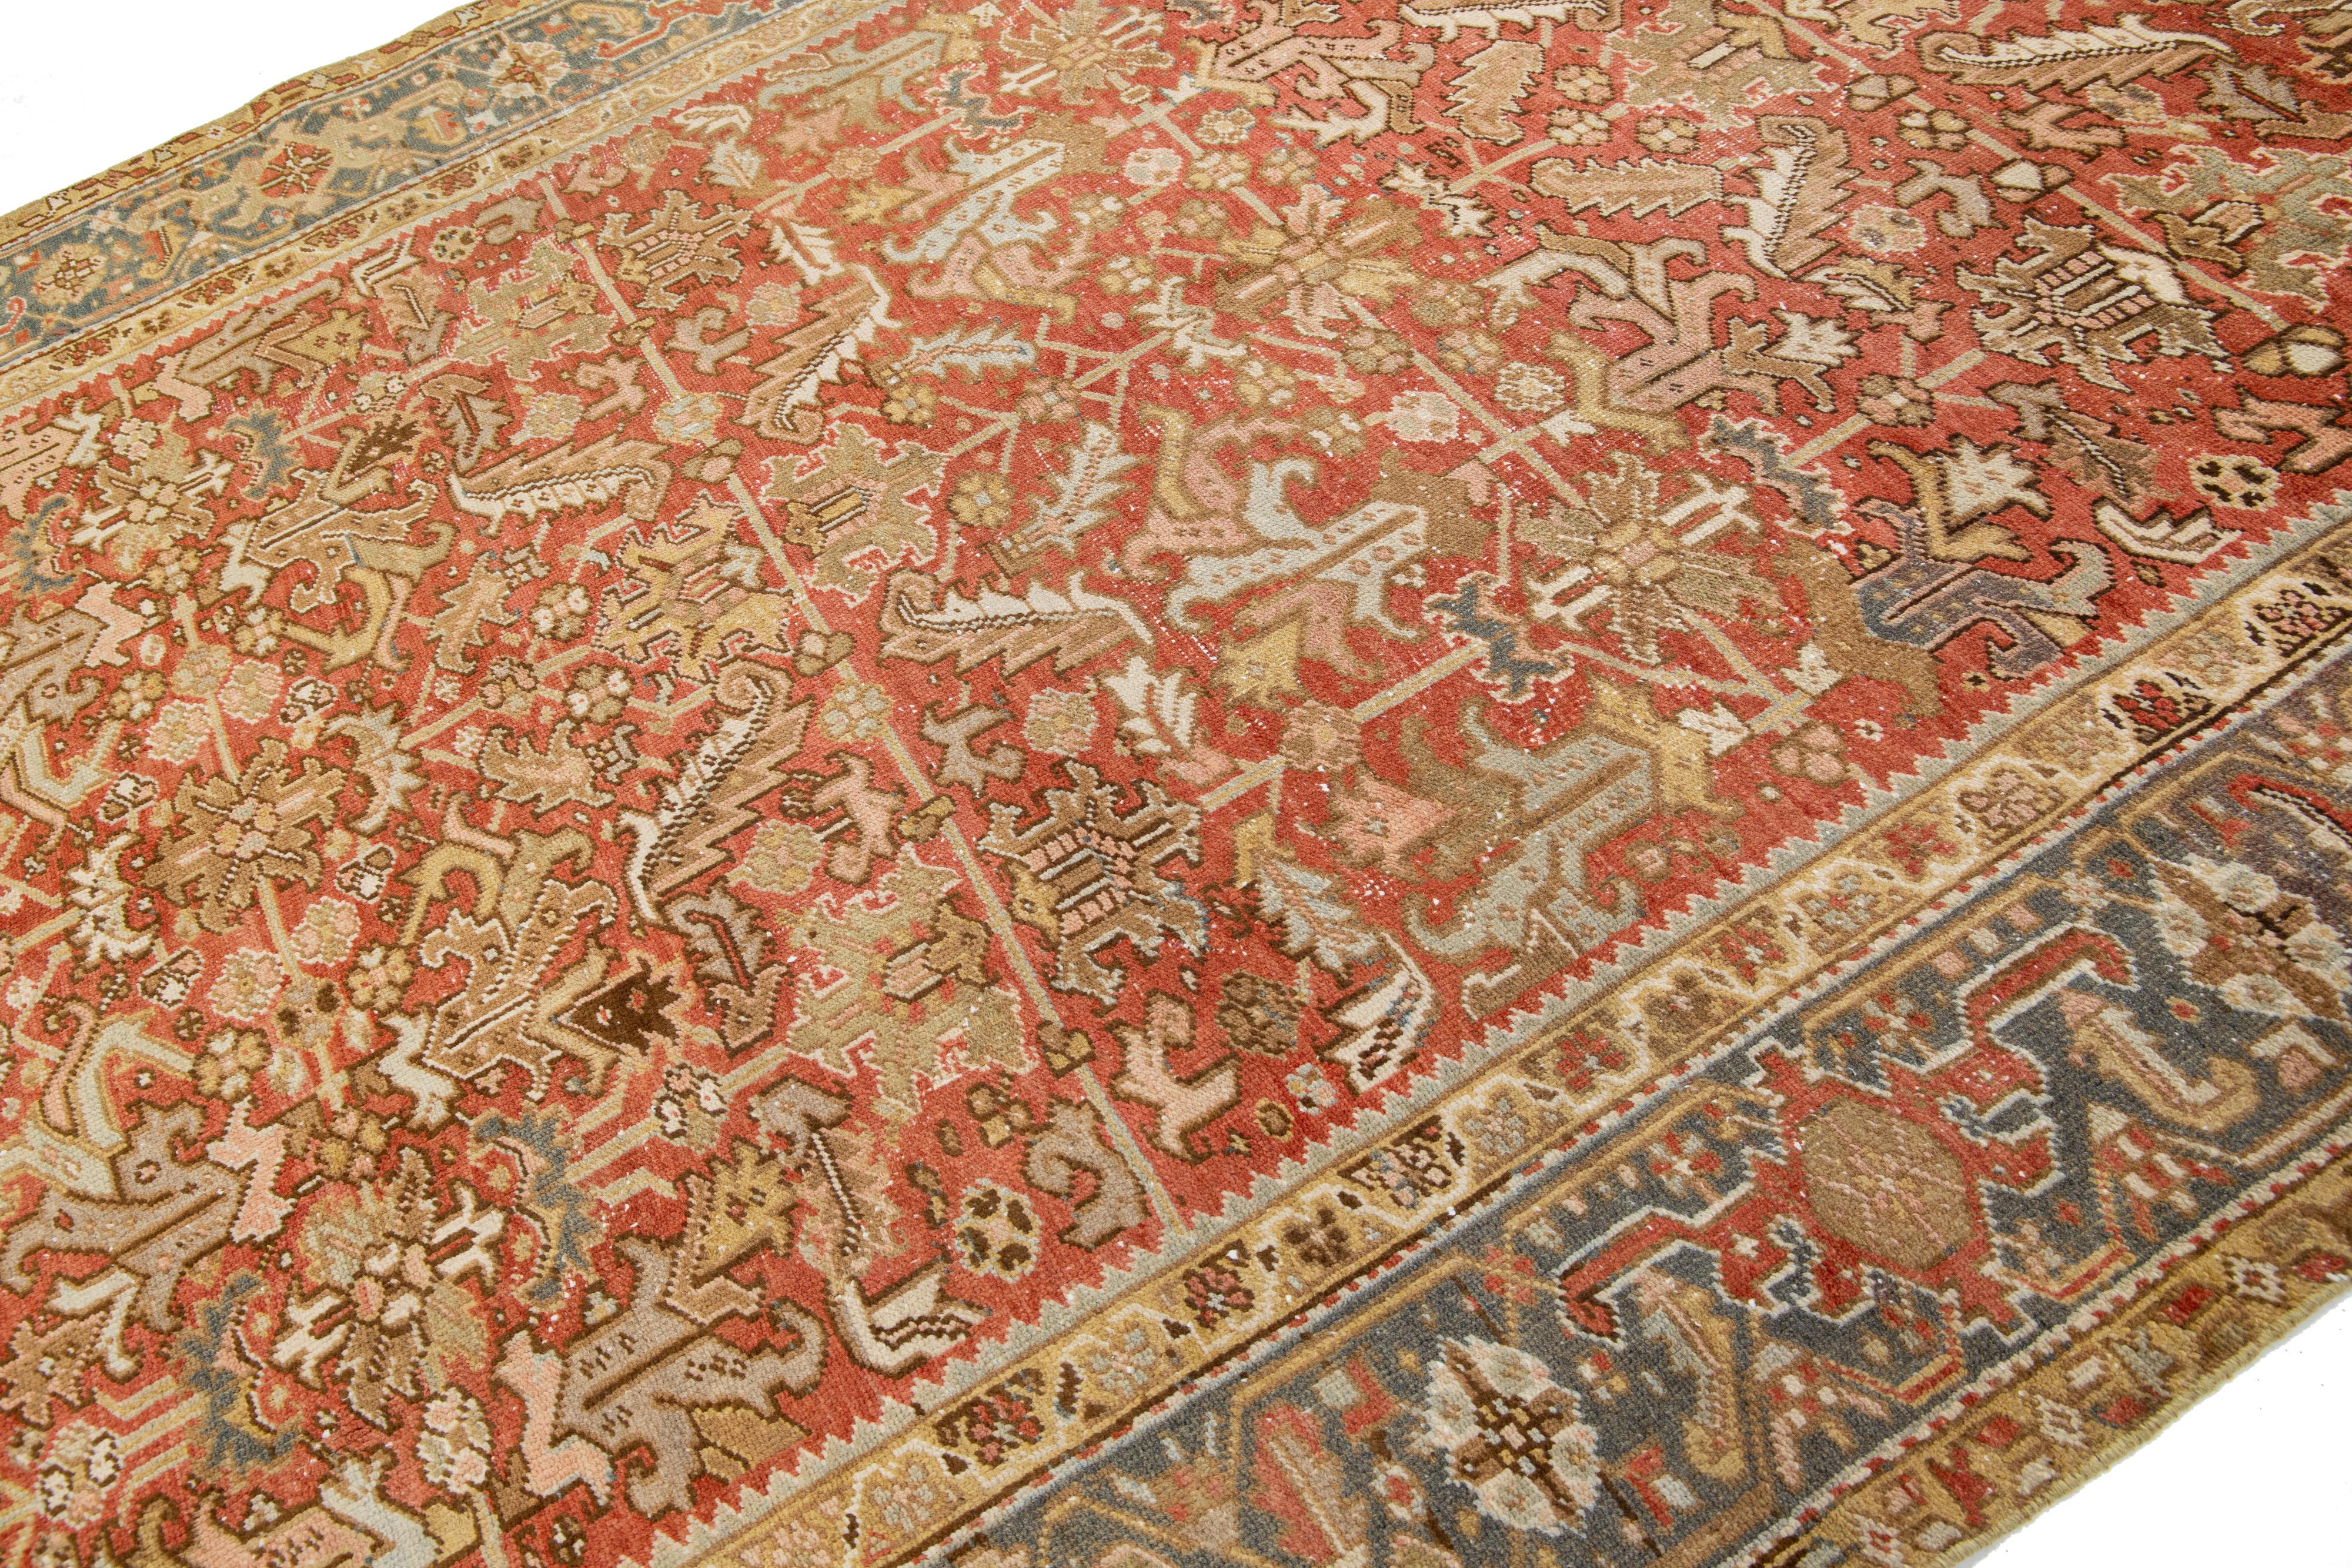 Heriz Serapi Allover Antique Persian Heriz Wool Rug In Rust Color From The 1920s For Sale